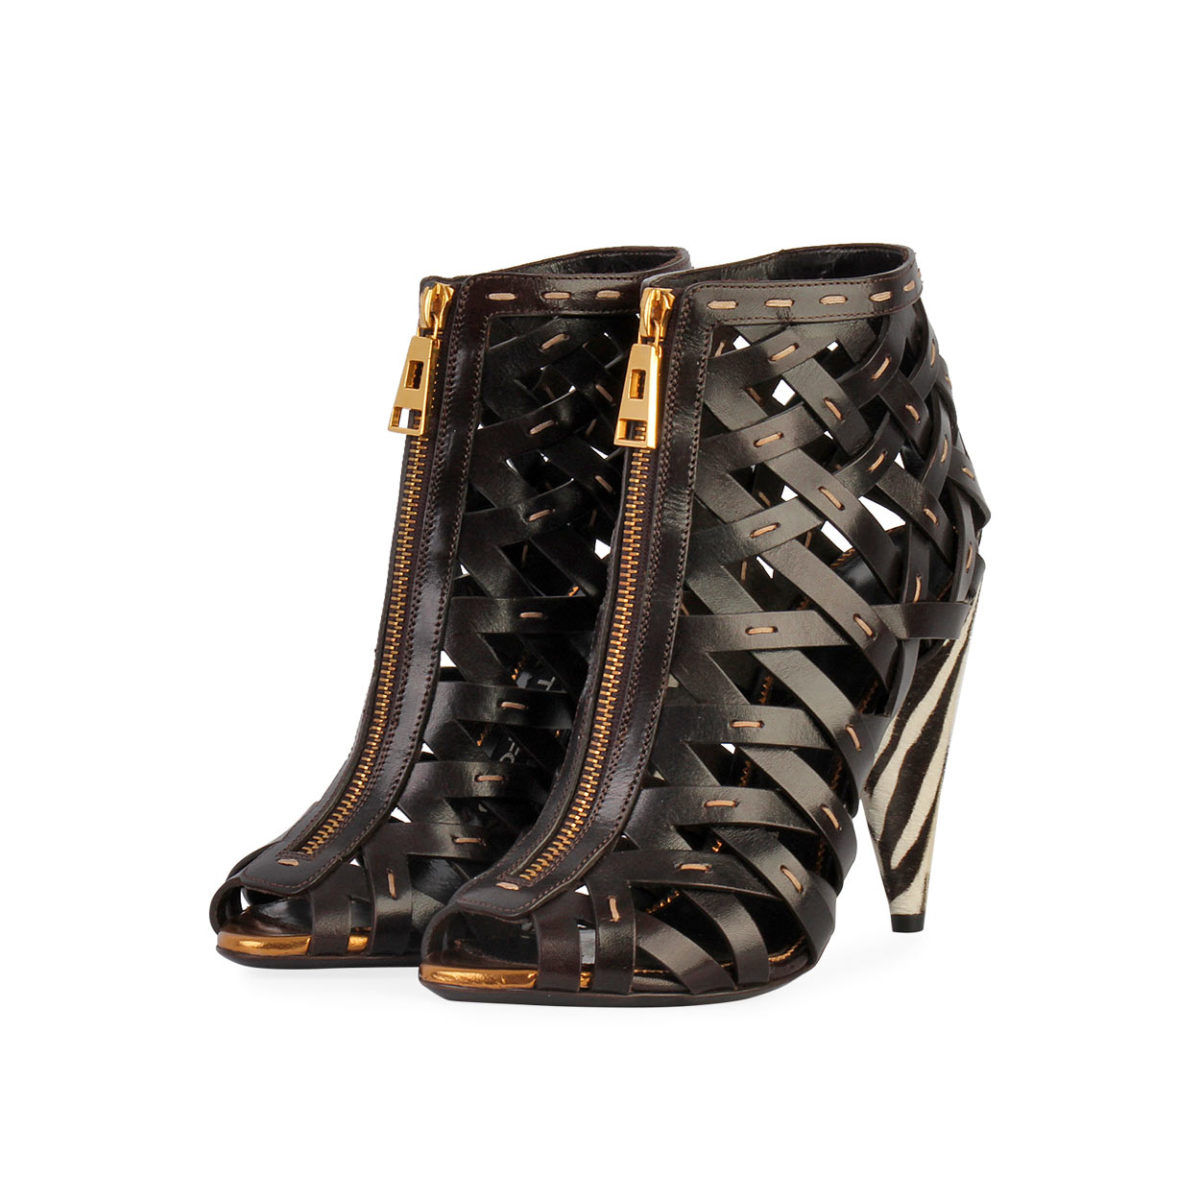 TOM FORD Leather Hand-Stitched Lattice Zebra Booties Black - S: 36 (3 ...